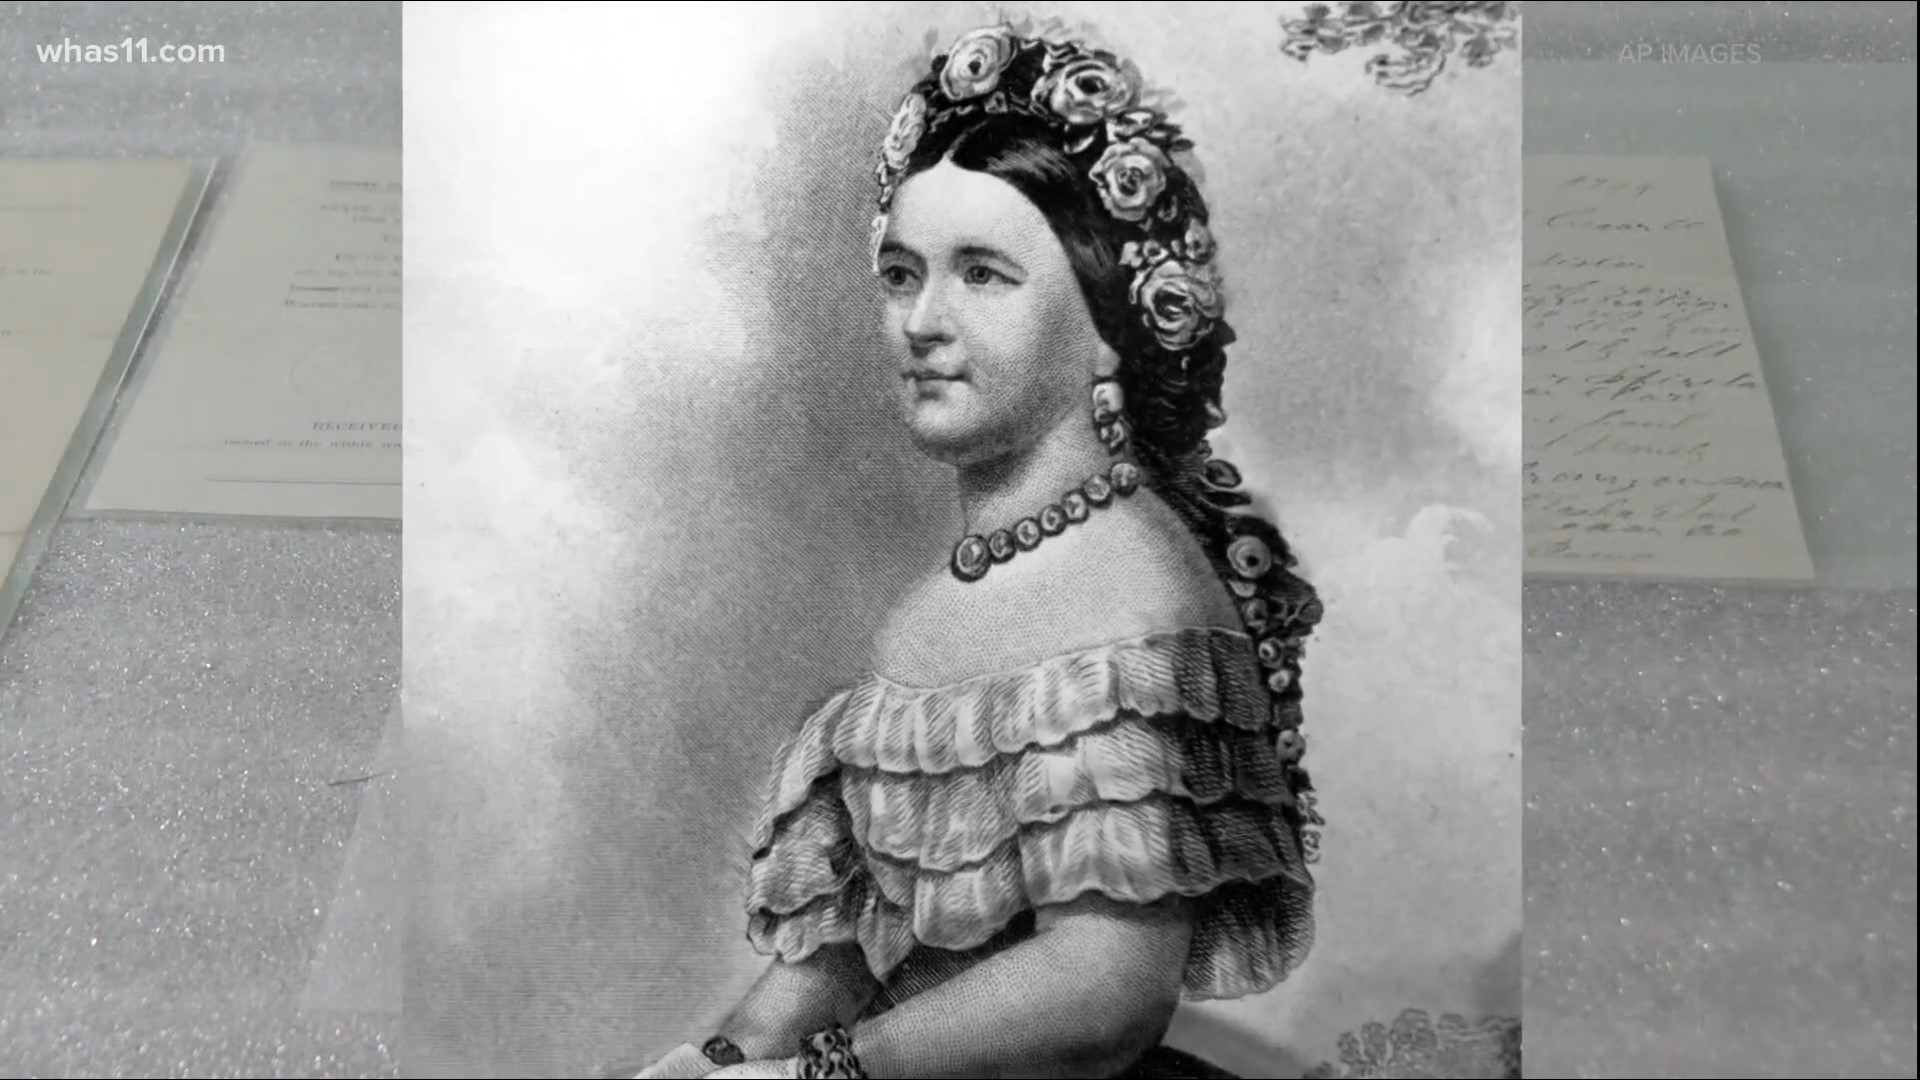 Born in Lexington, Mary Todd Lincoln brought the Bluegrass State to the White House, in a time when it was still considered a frontier.